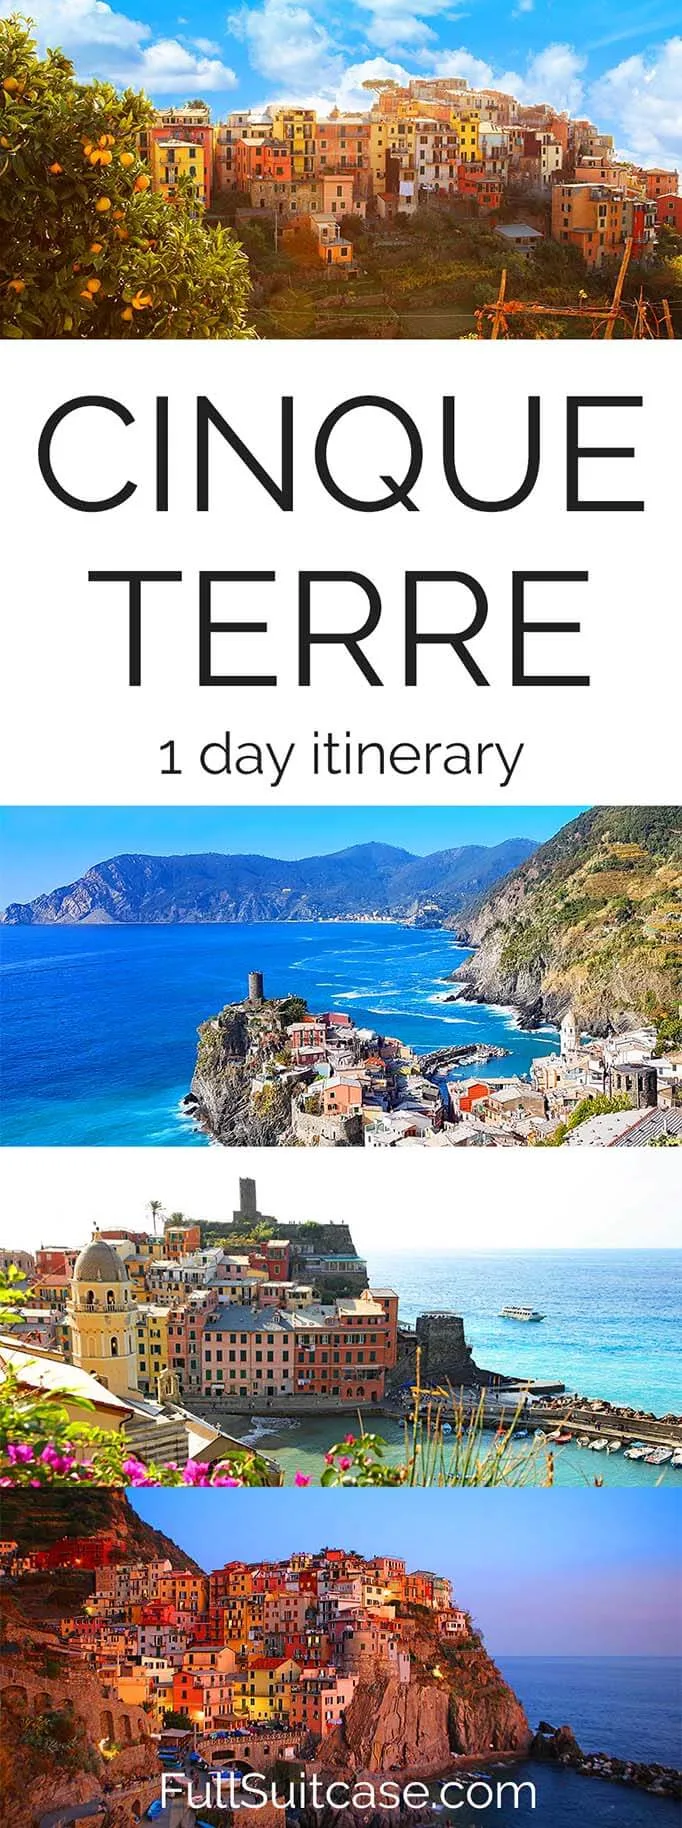 One day itinerary for Cinque Terre in Italy #italy